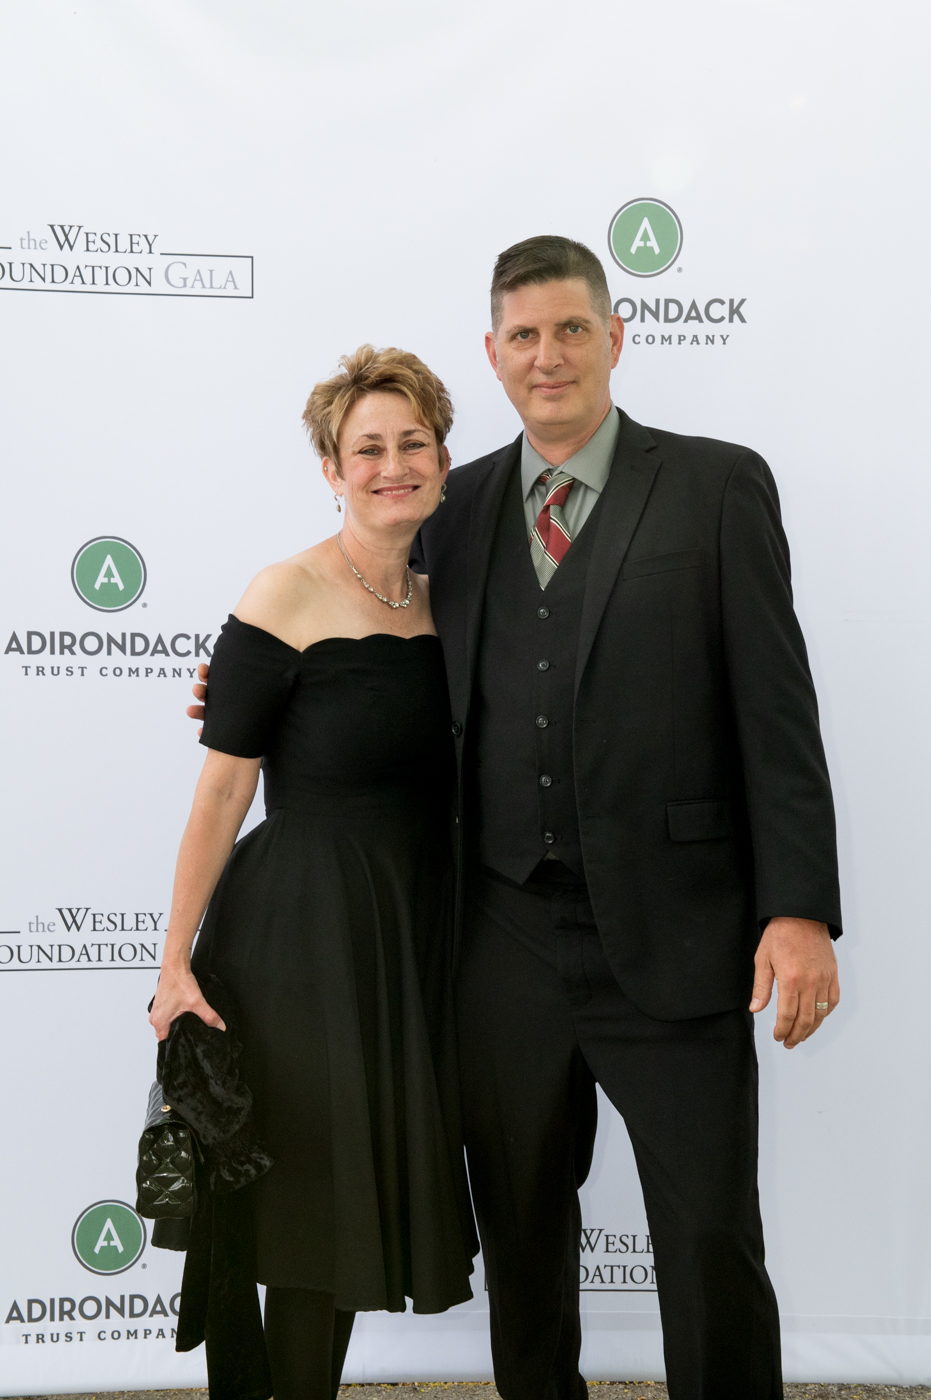 A couple posing for a picture, a woman on the left wearing a black dress and a man wearing a black suit on the right.